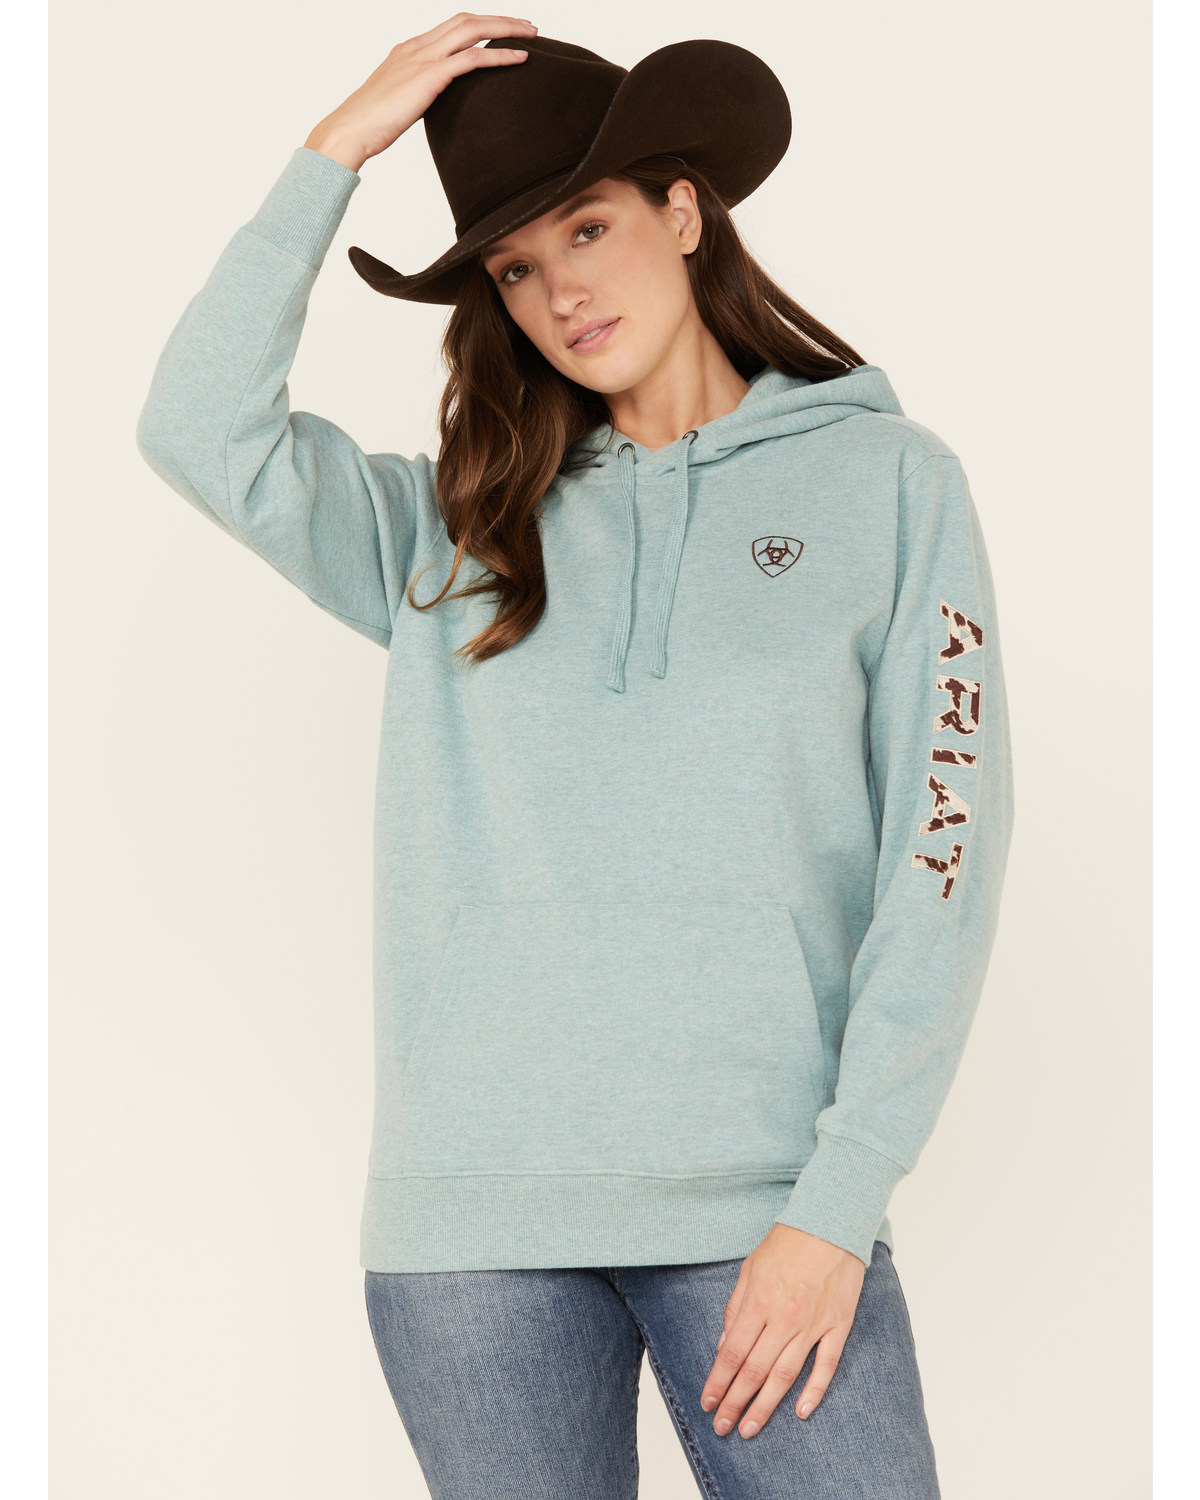 Ariat Women's Cow Print Embroidered Logo Hoodie